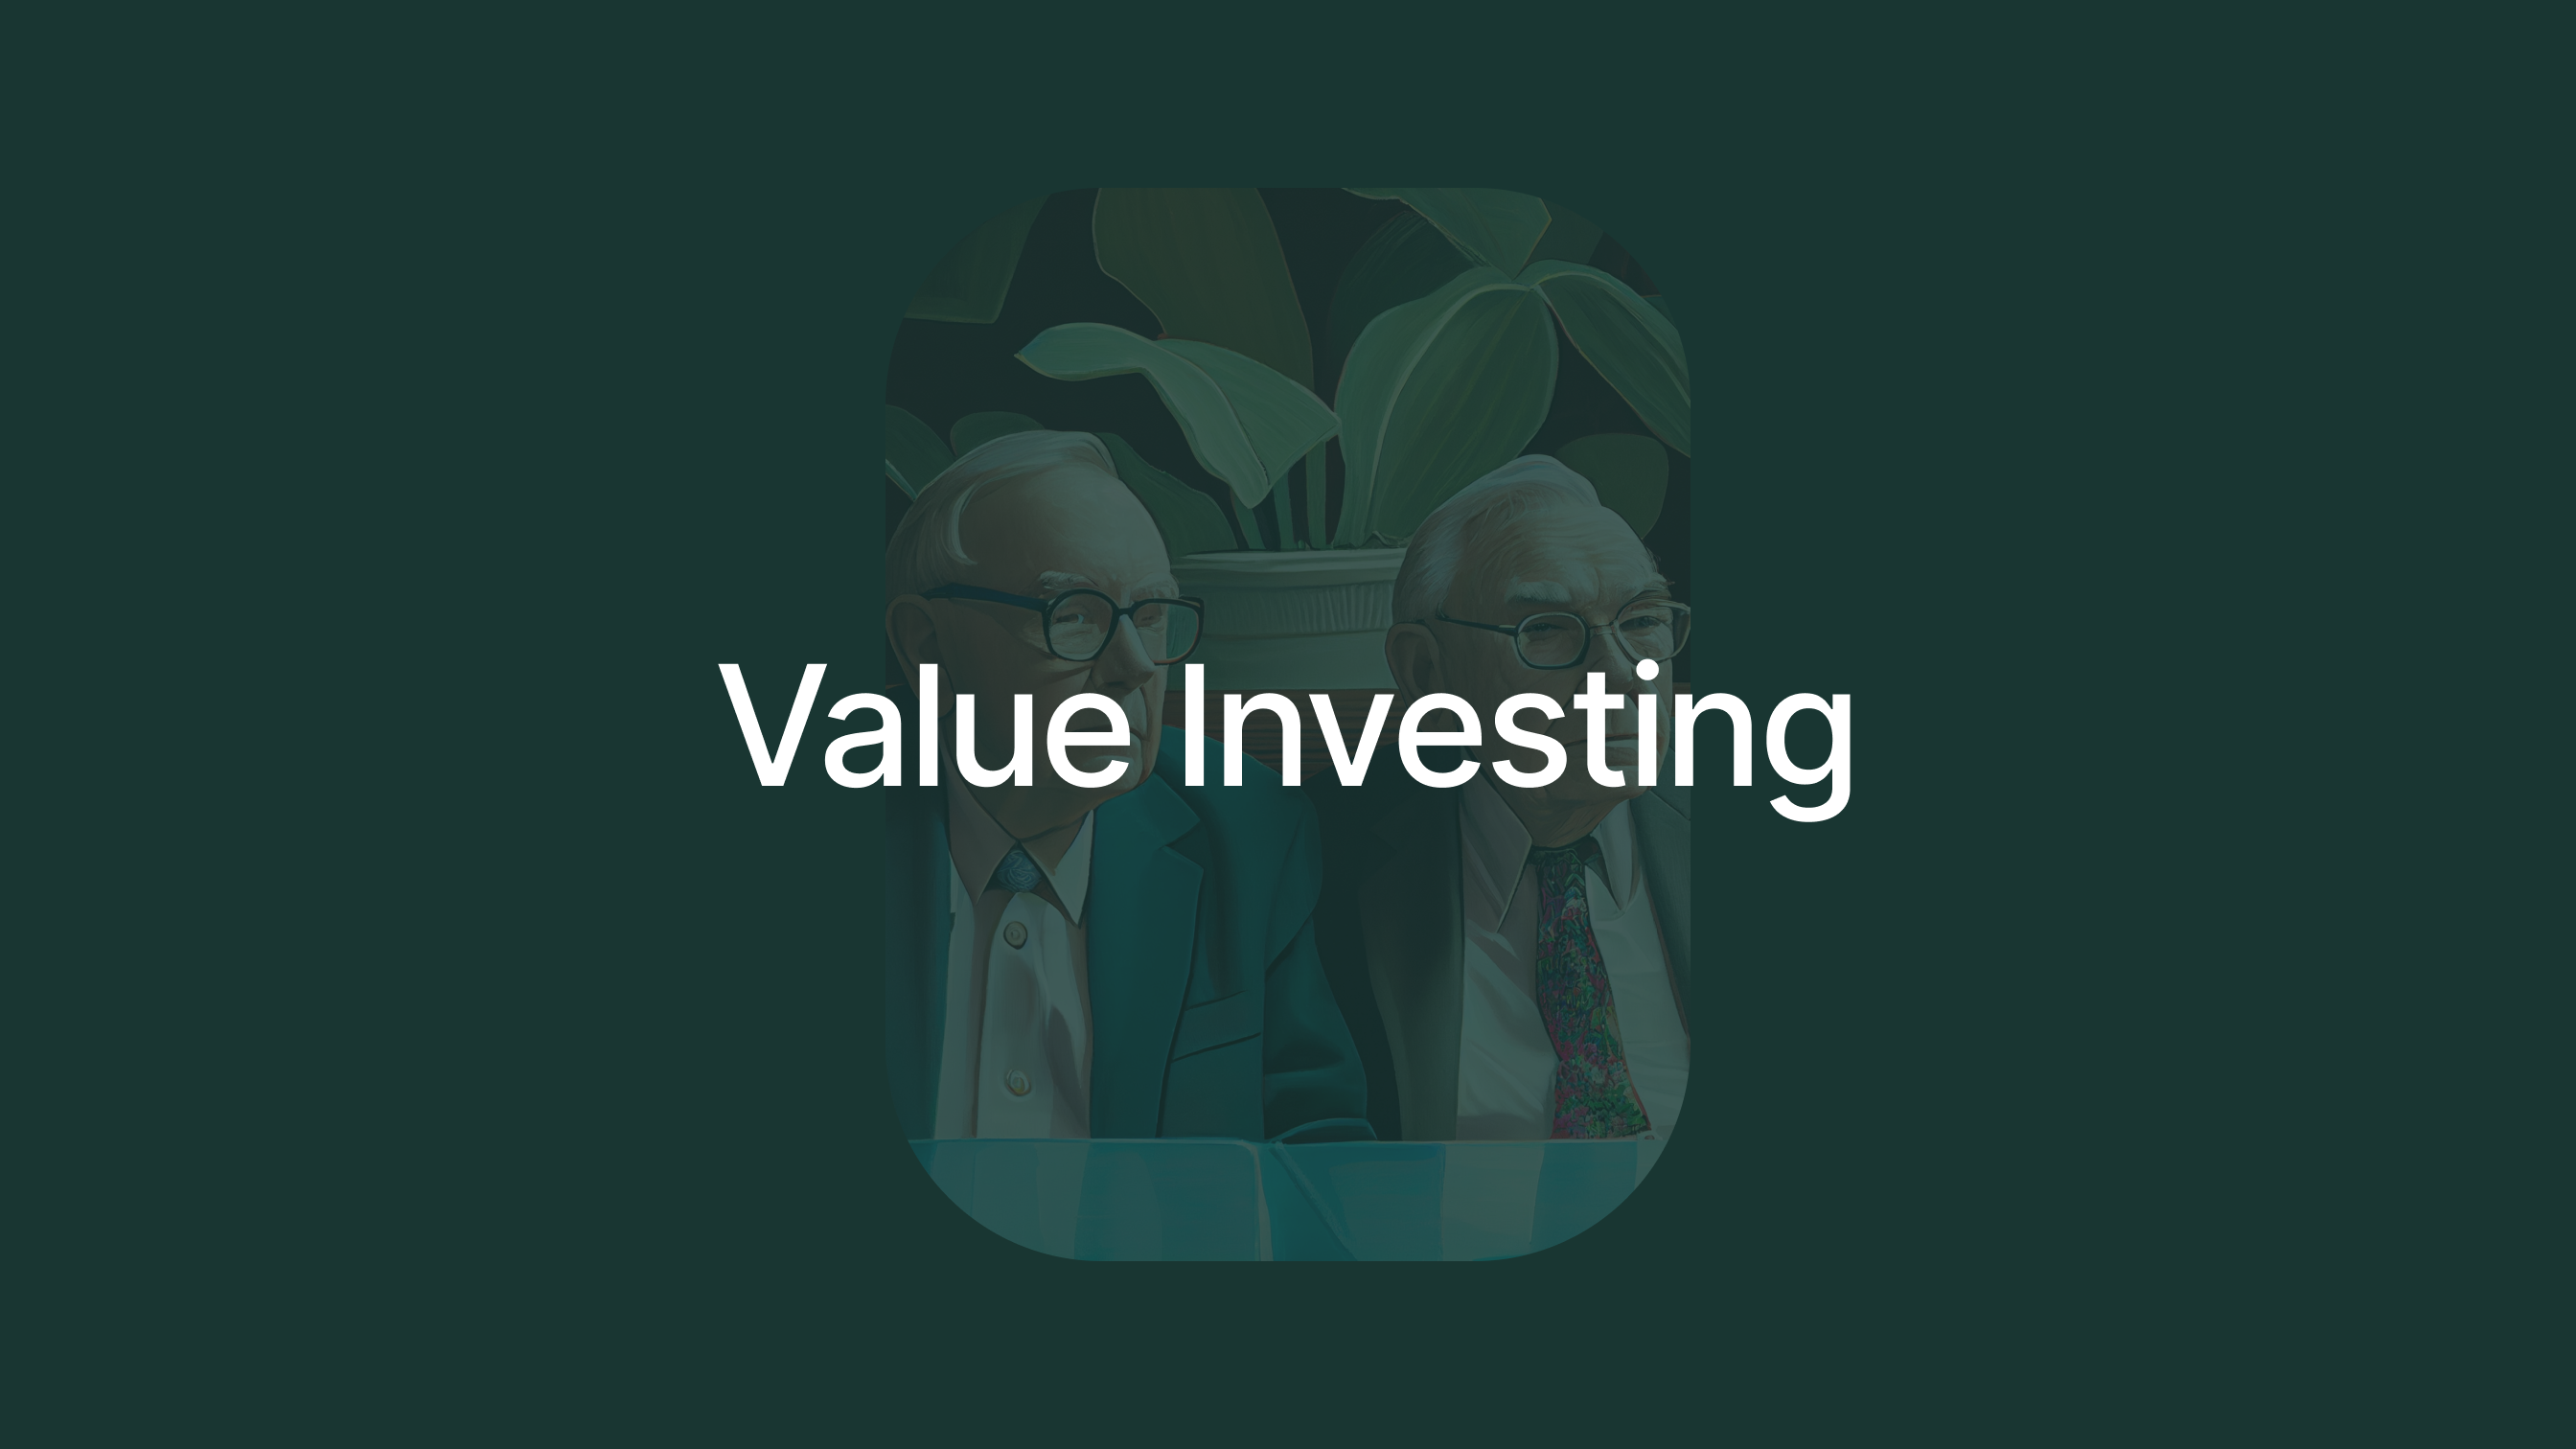 Value Investing - Warren Buffett and Charlie Munger - The Oracle from Omaha